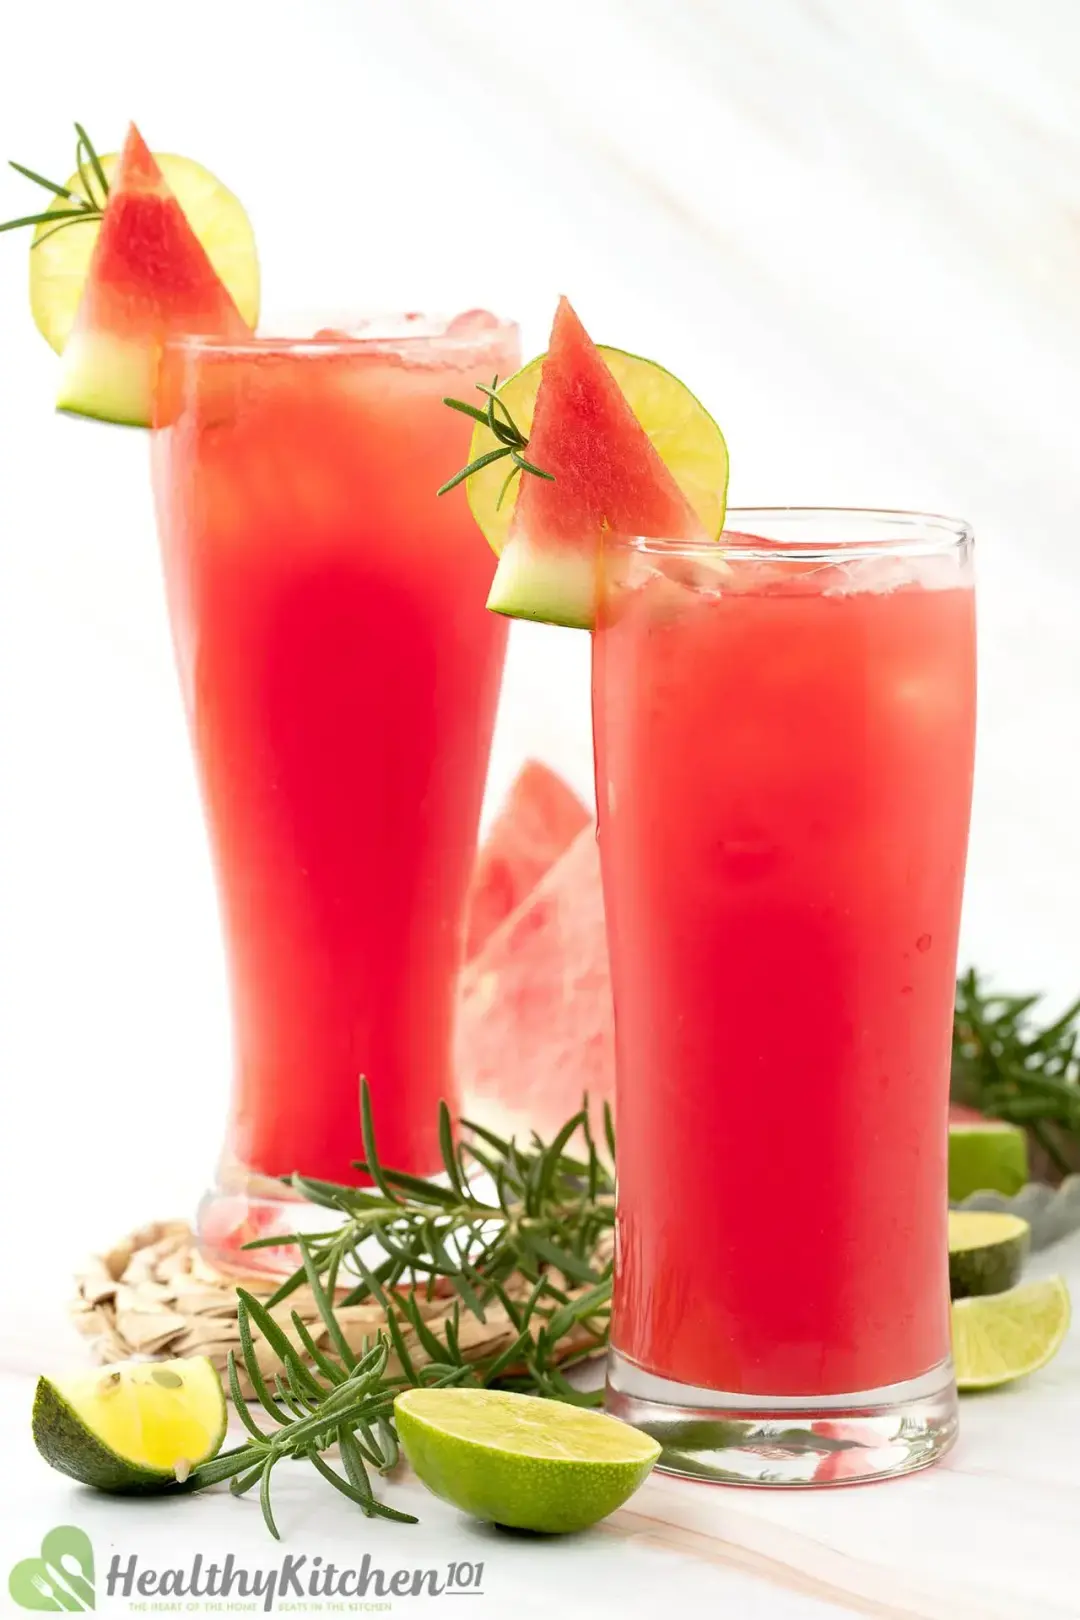 Two iced watermelon juice glasses held side by side, with watermelon wedges, limes, and rosemary as garnish